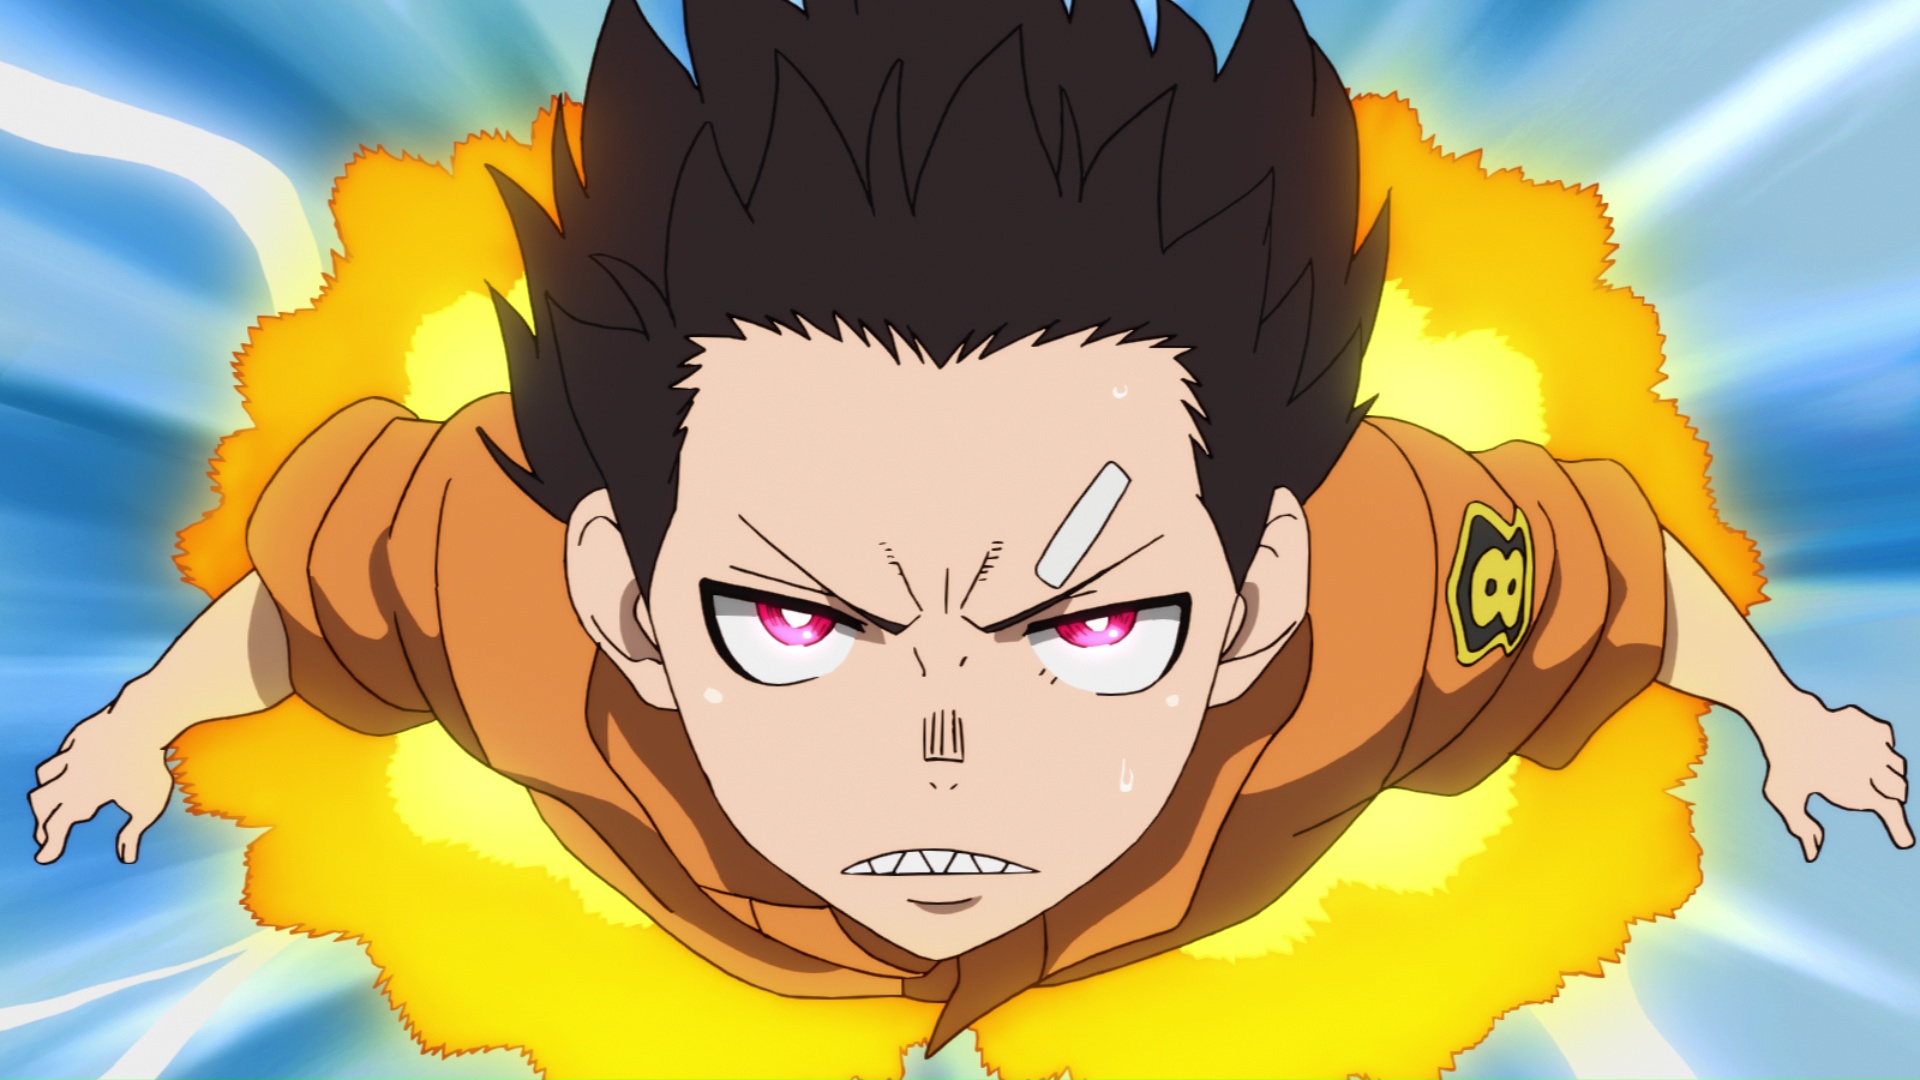 FunimationCon 2020 - Fire Force Season 2 Episodes 1-2: First Impressions -  Cat with Monocle